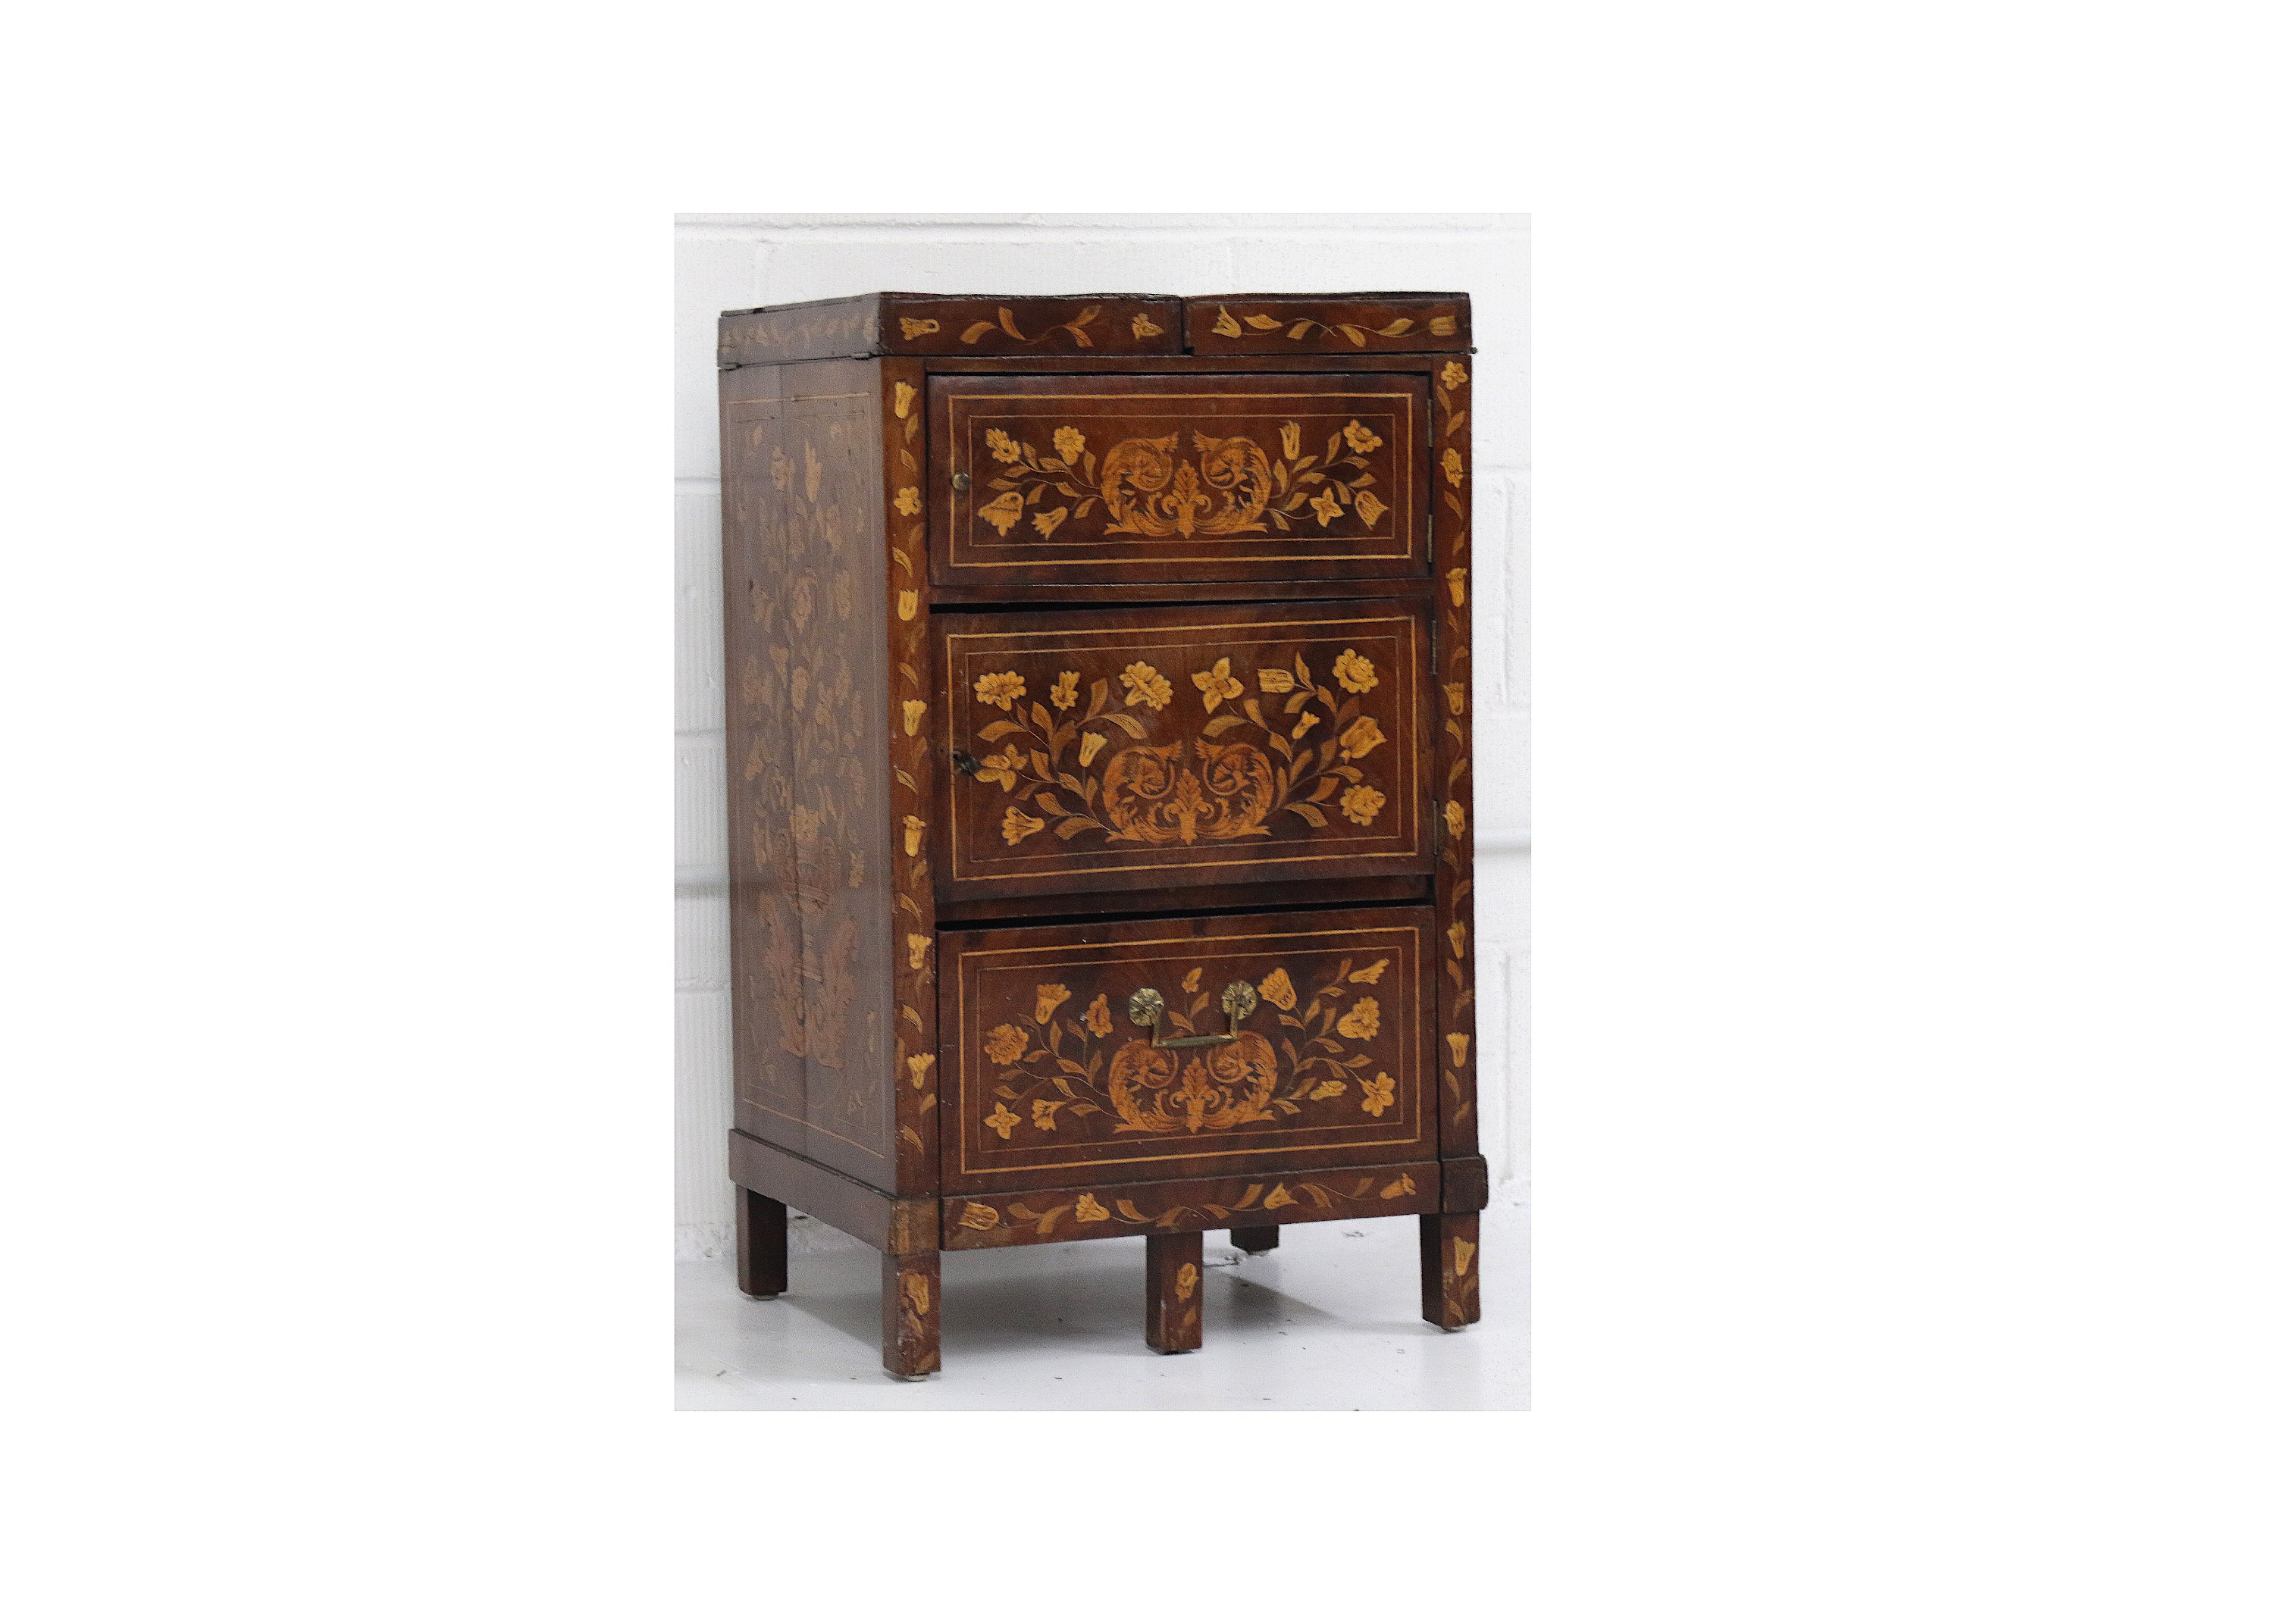 An early 19th Century Dutch walnut and floral marquetry inlaid enclosed washstand, the twin flap top